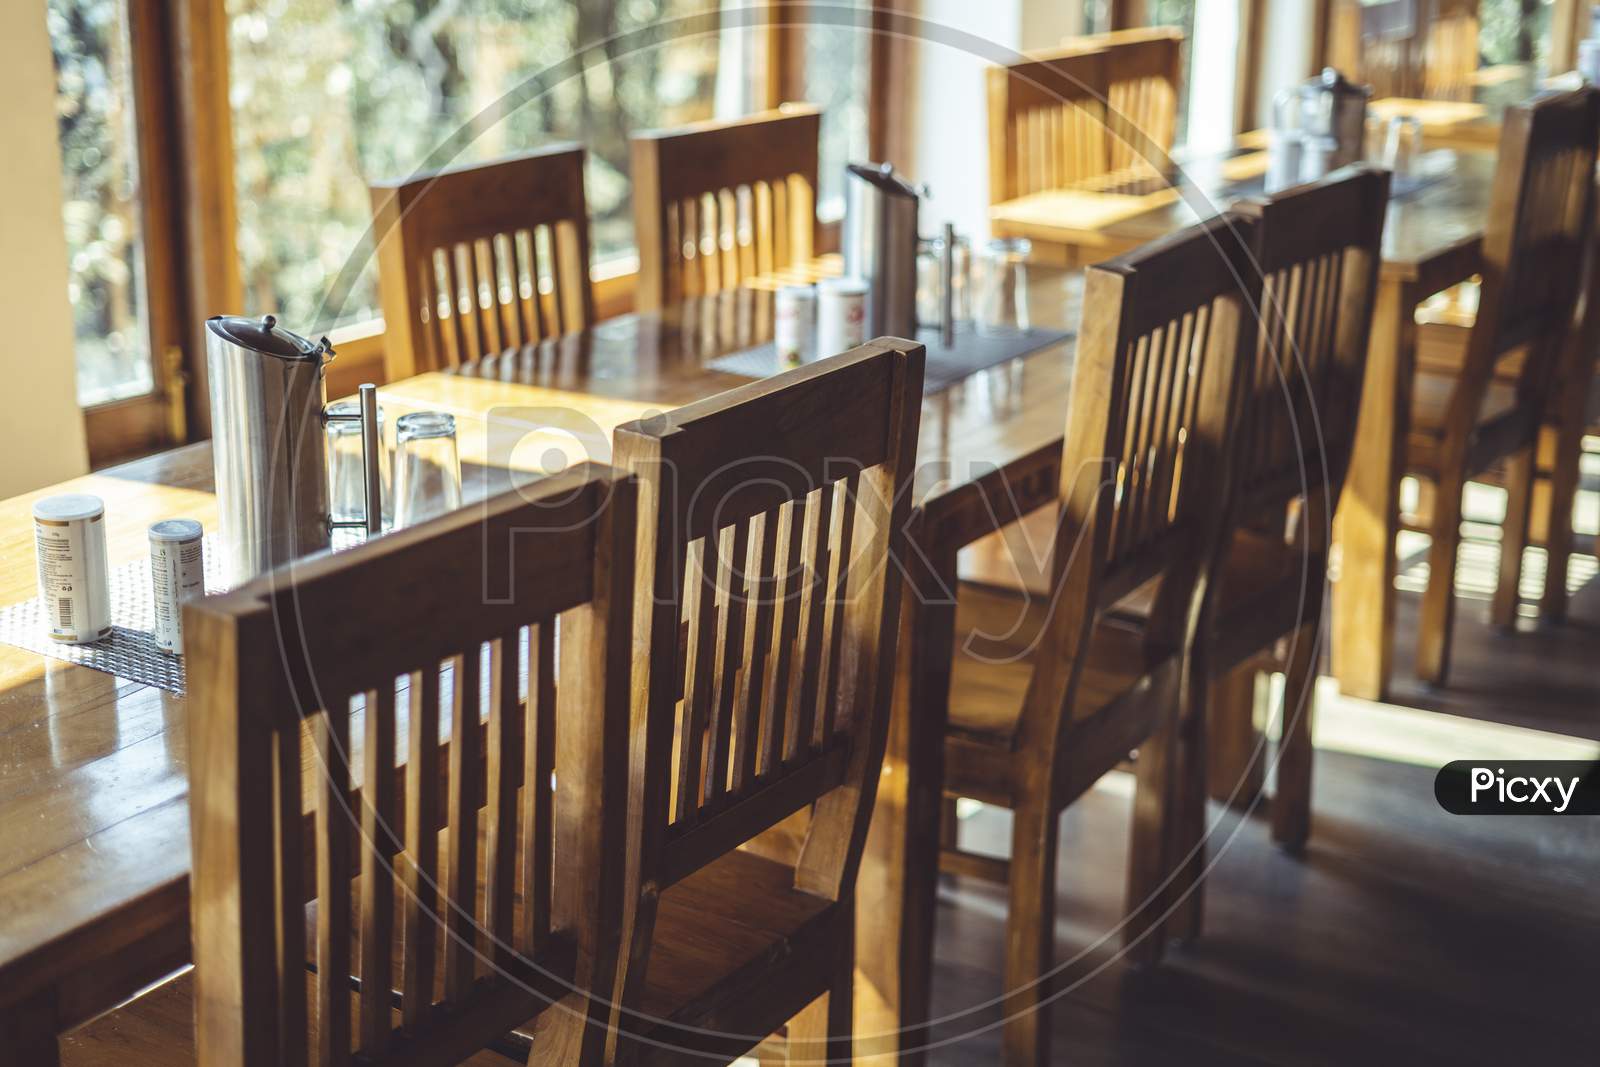 Shot Of A Dining Table With Focus On The Dining Chairs Captured In Interior Of A Restaurant.